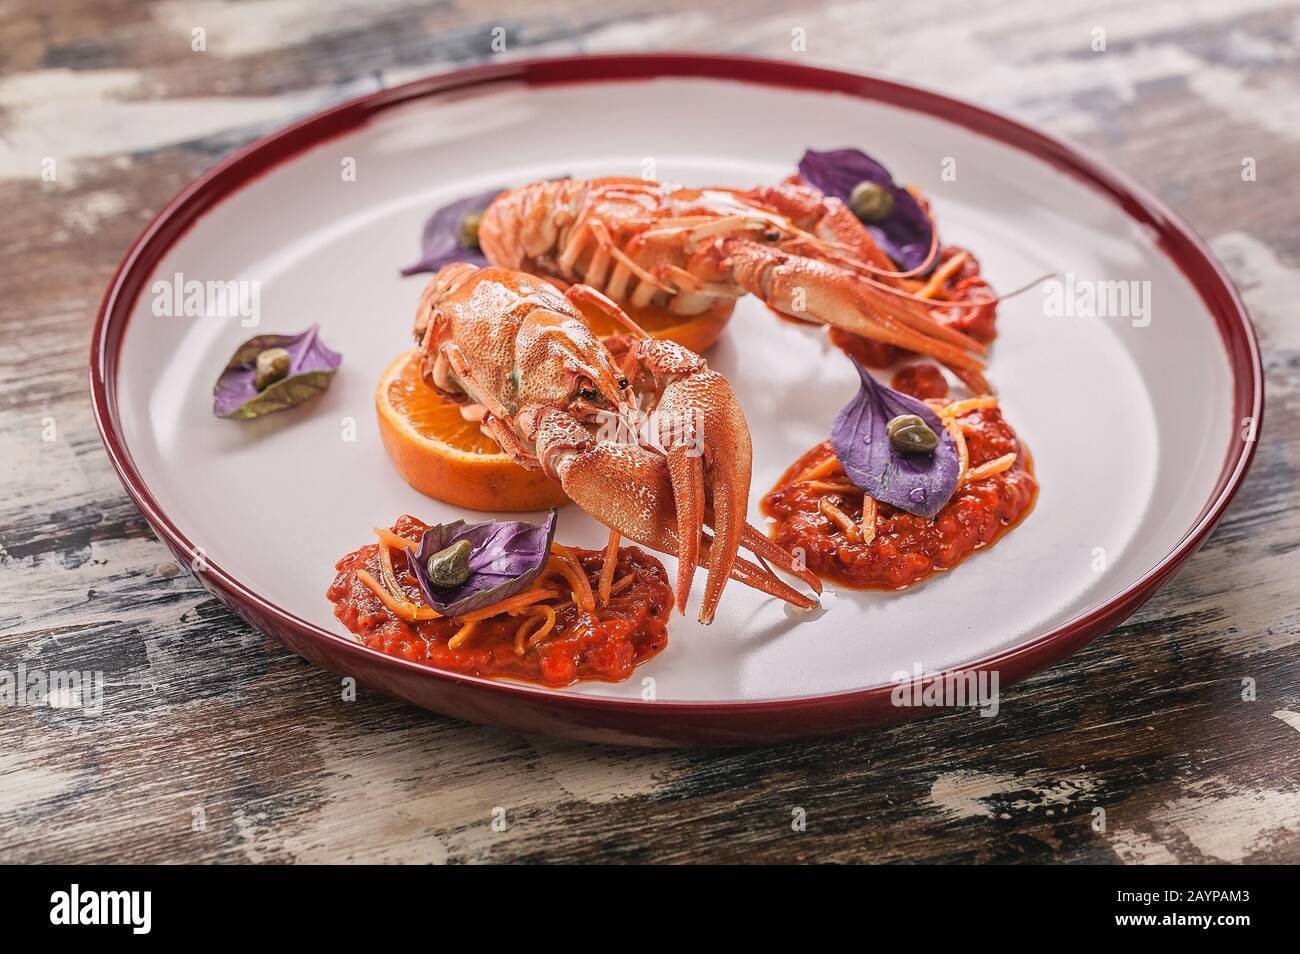 Boiled crayfish. Delicacy with chili pepper sauce, basil and capers on a plate. Gourmet cuisine Stock Photo